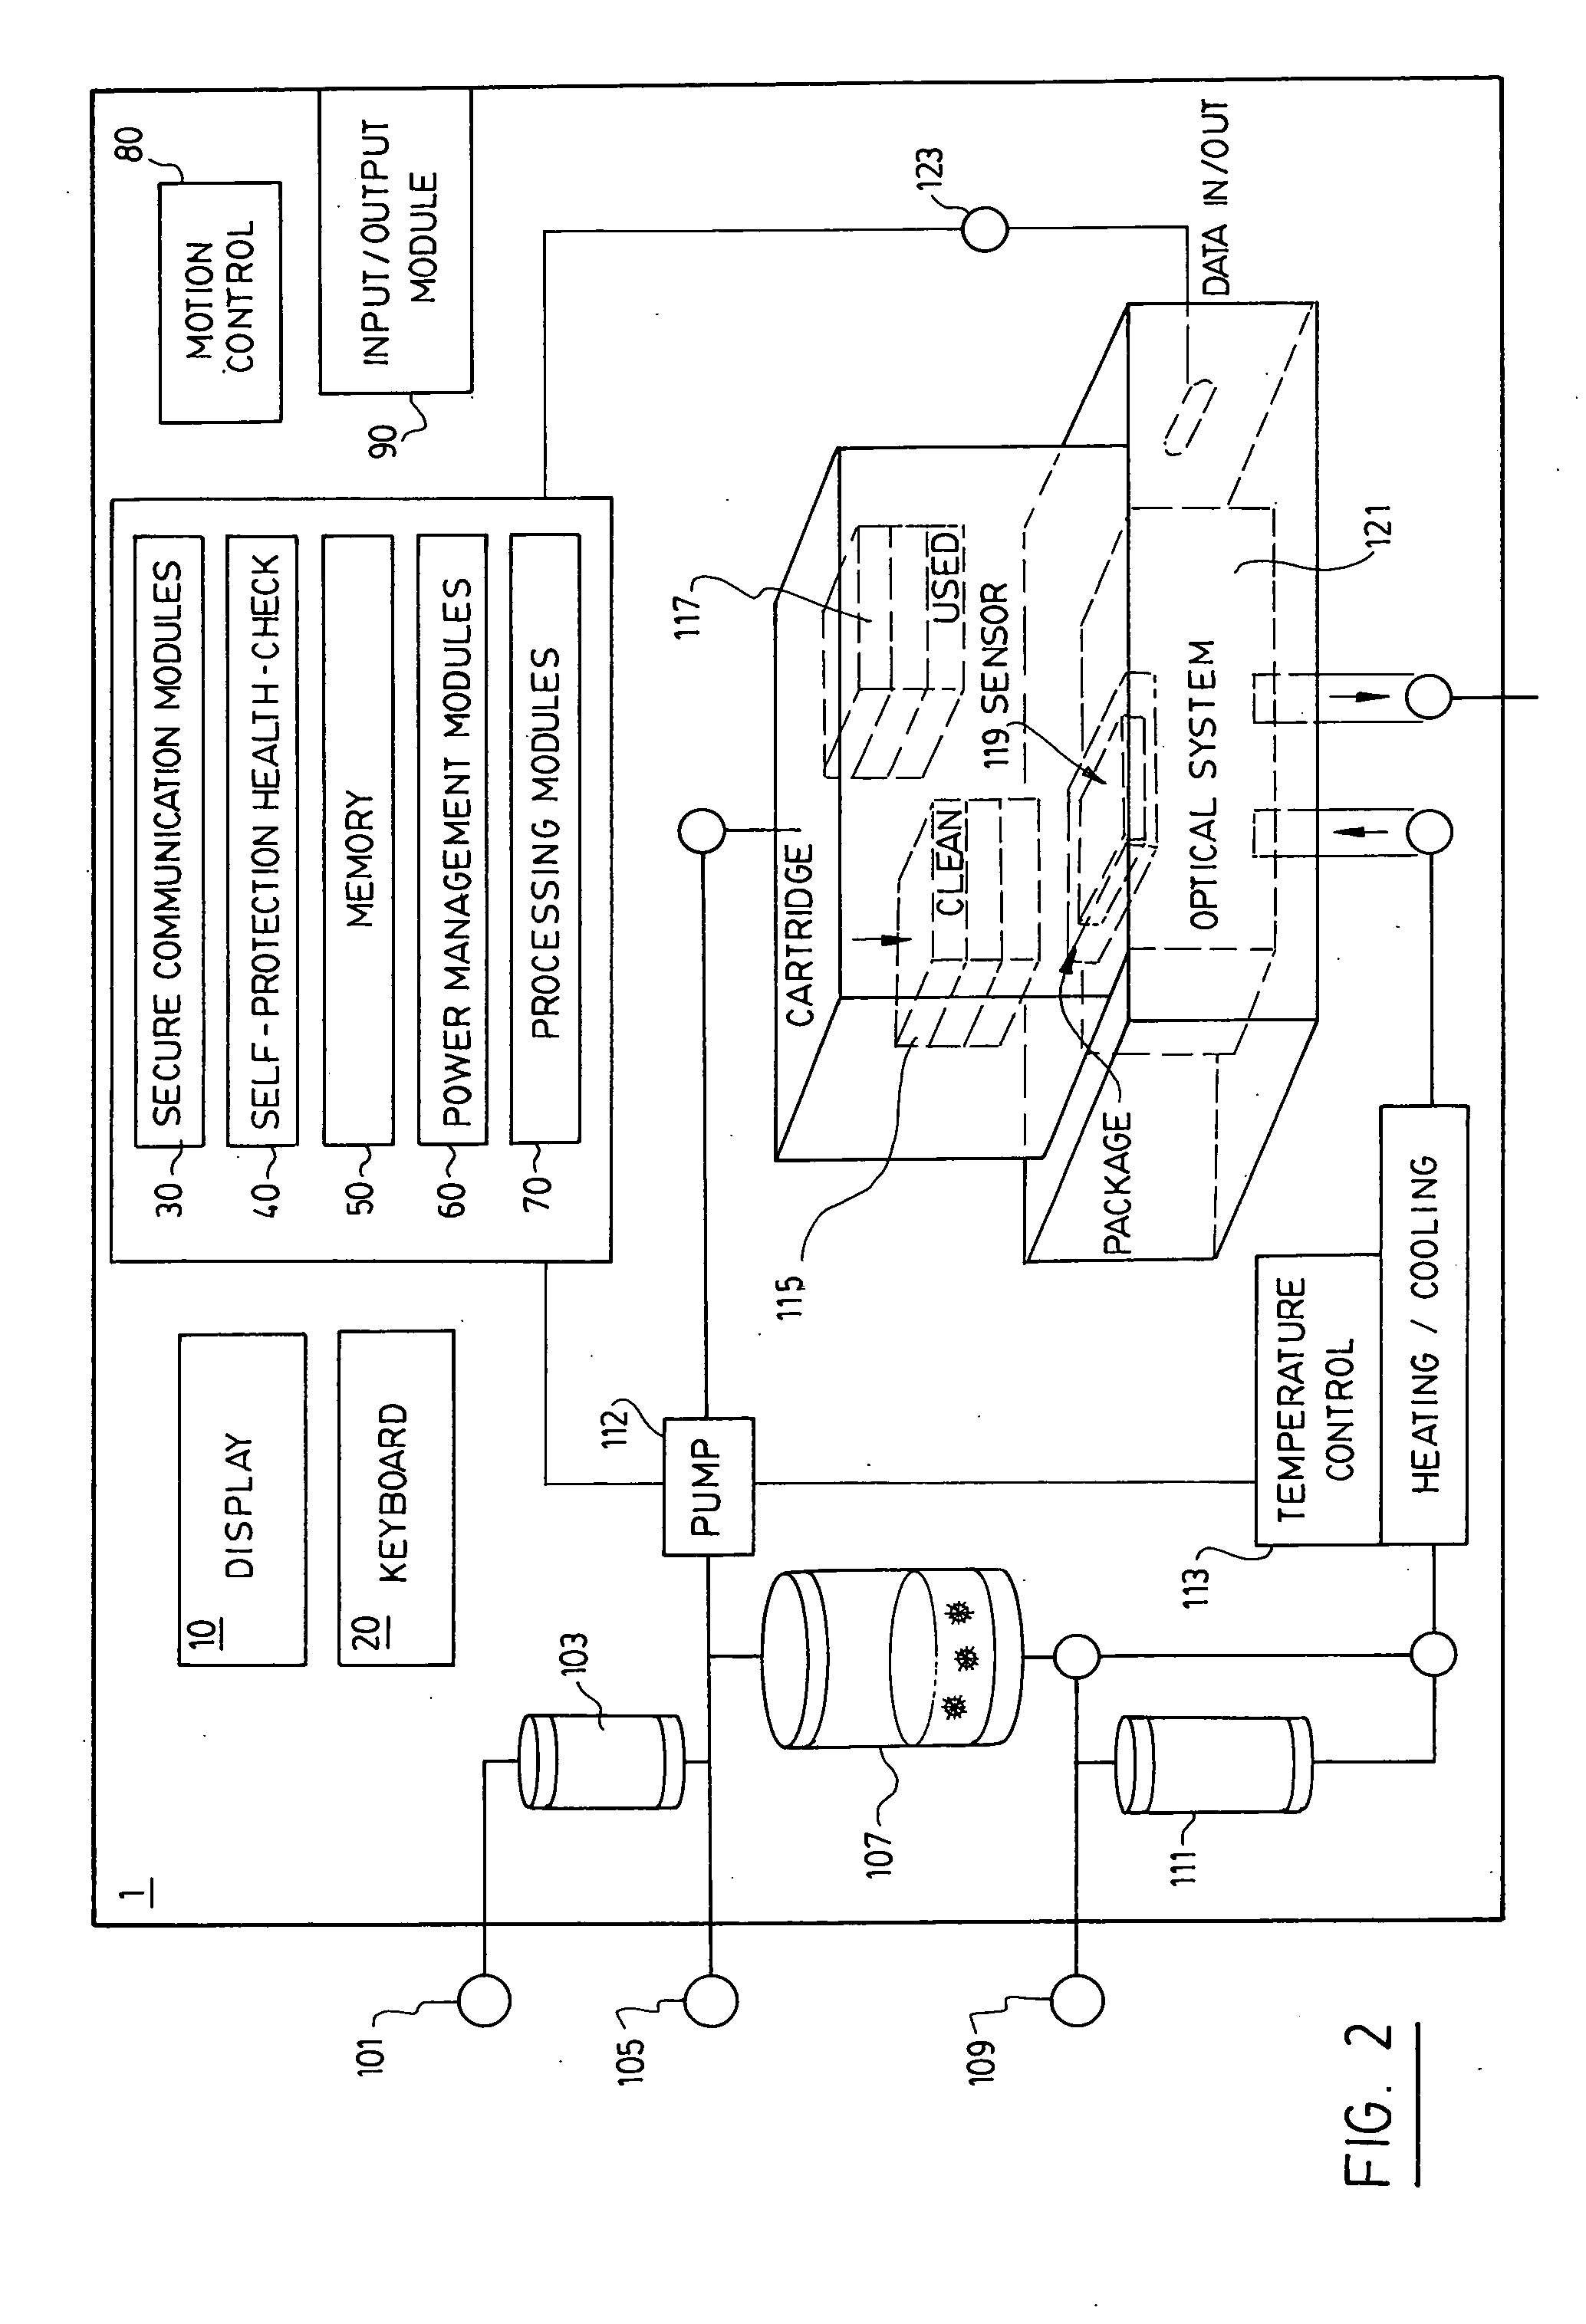 System and method for real-time detection and remote monitoring of pathogens